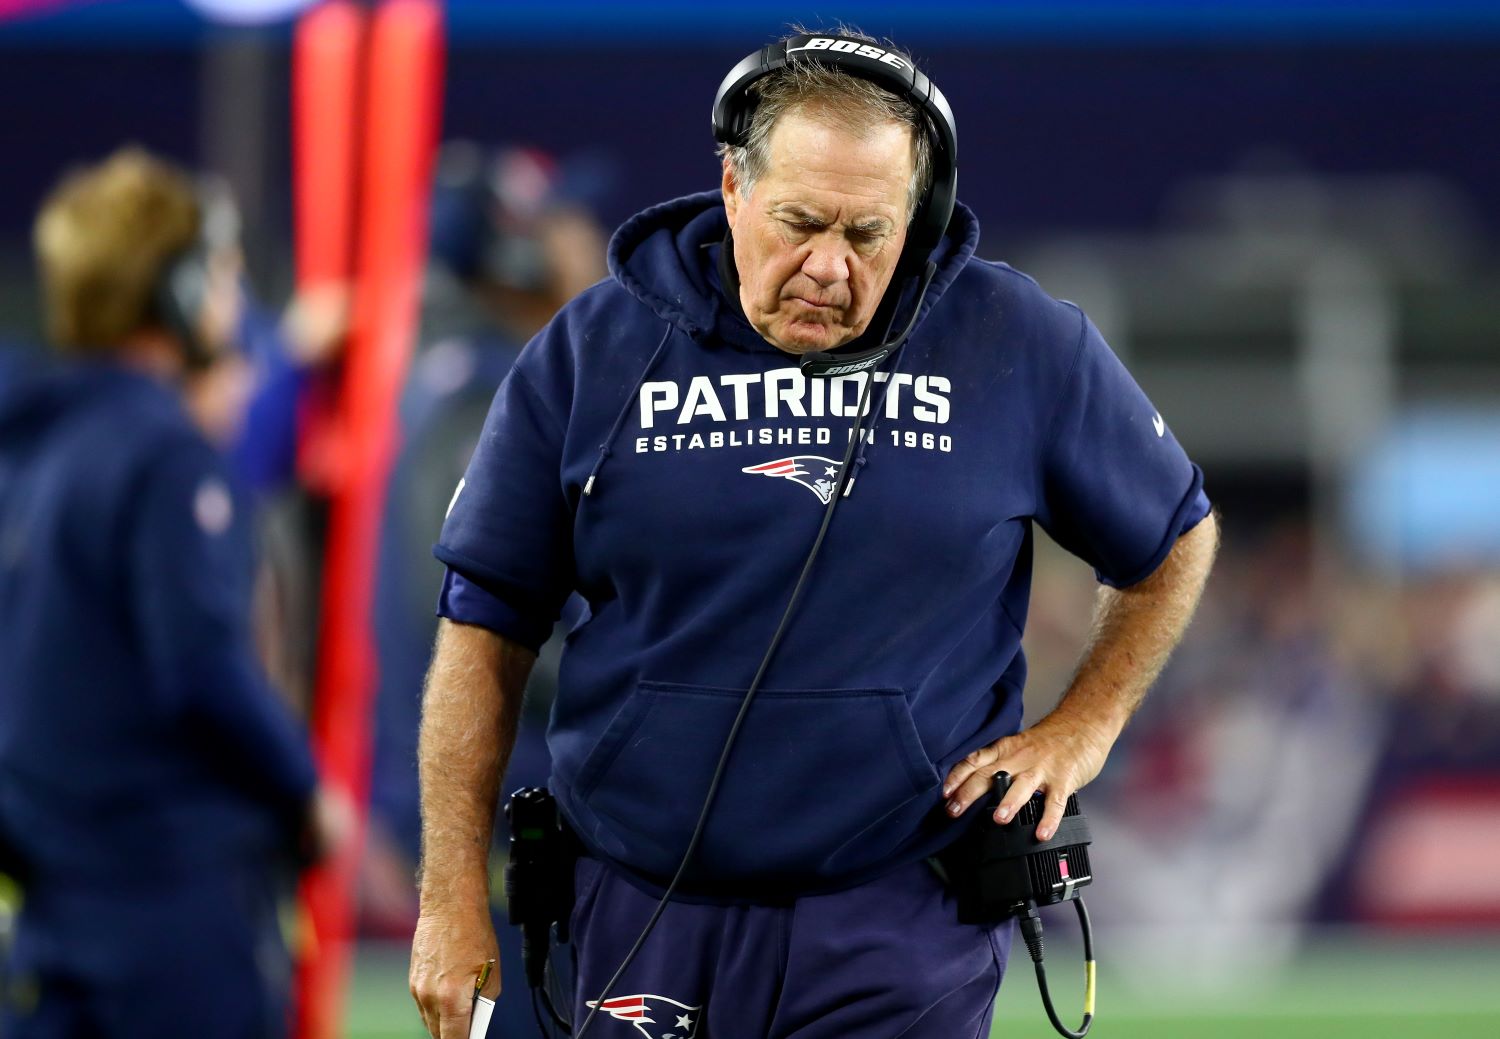 The last time the Patriots had a losing record was in Bill Belichick's first year as head coach.